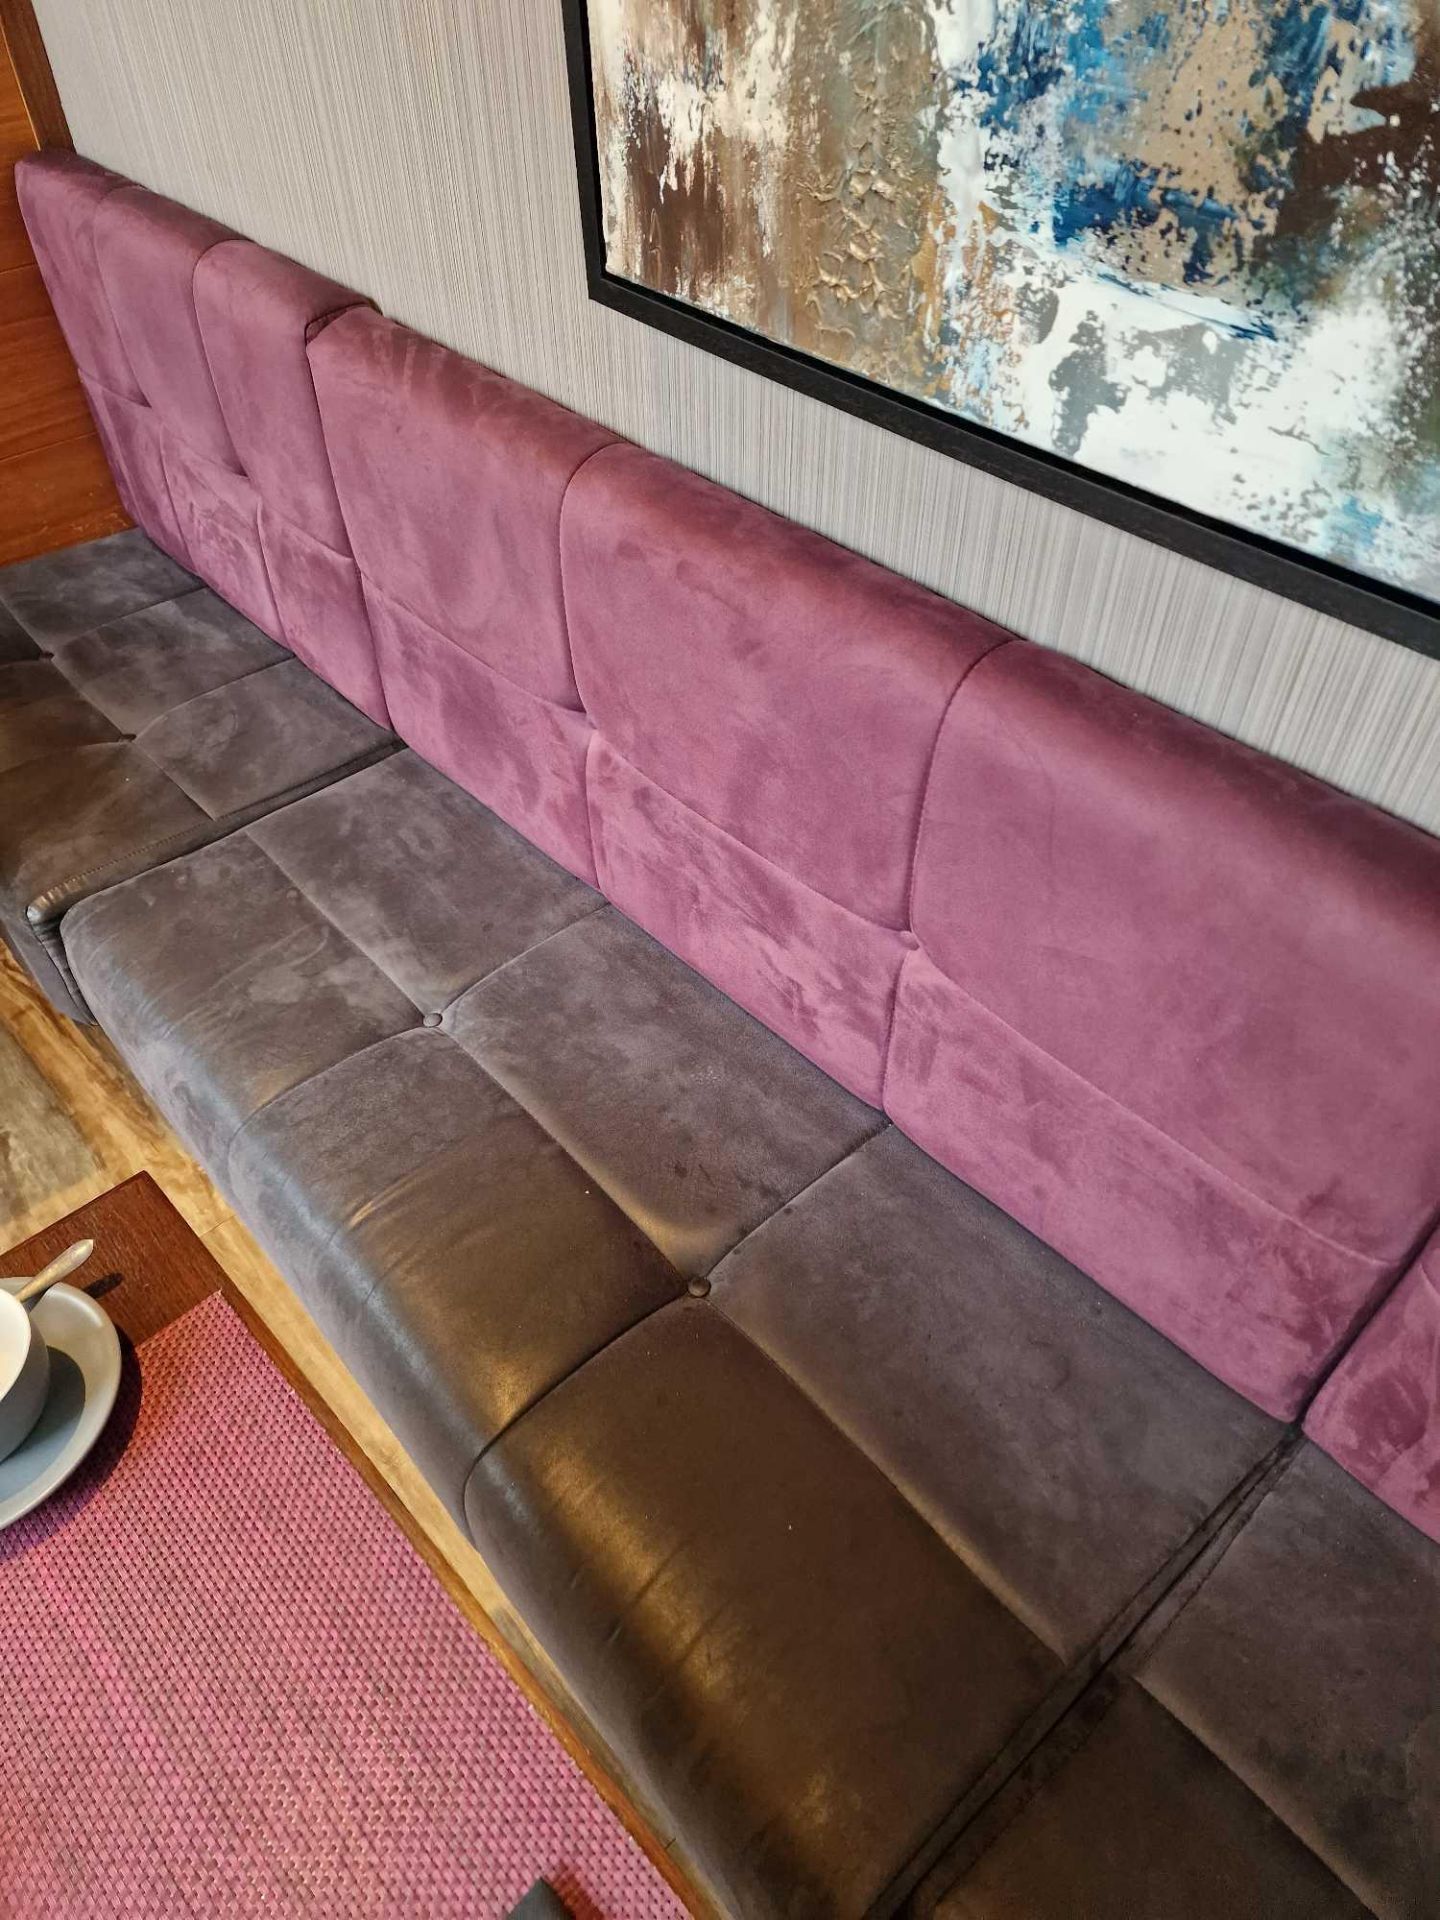 Banquette seating straight run n a mauve and grey upholstered suede effect fabric seats - Image 2 of 2